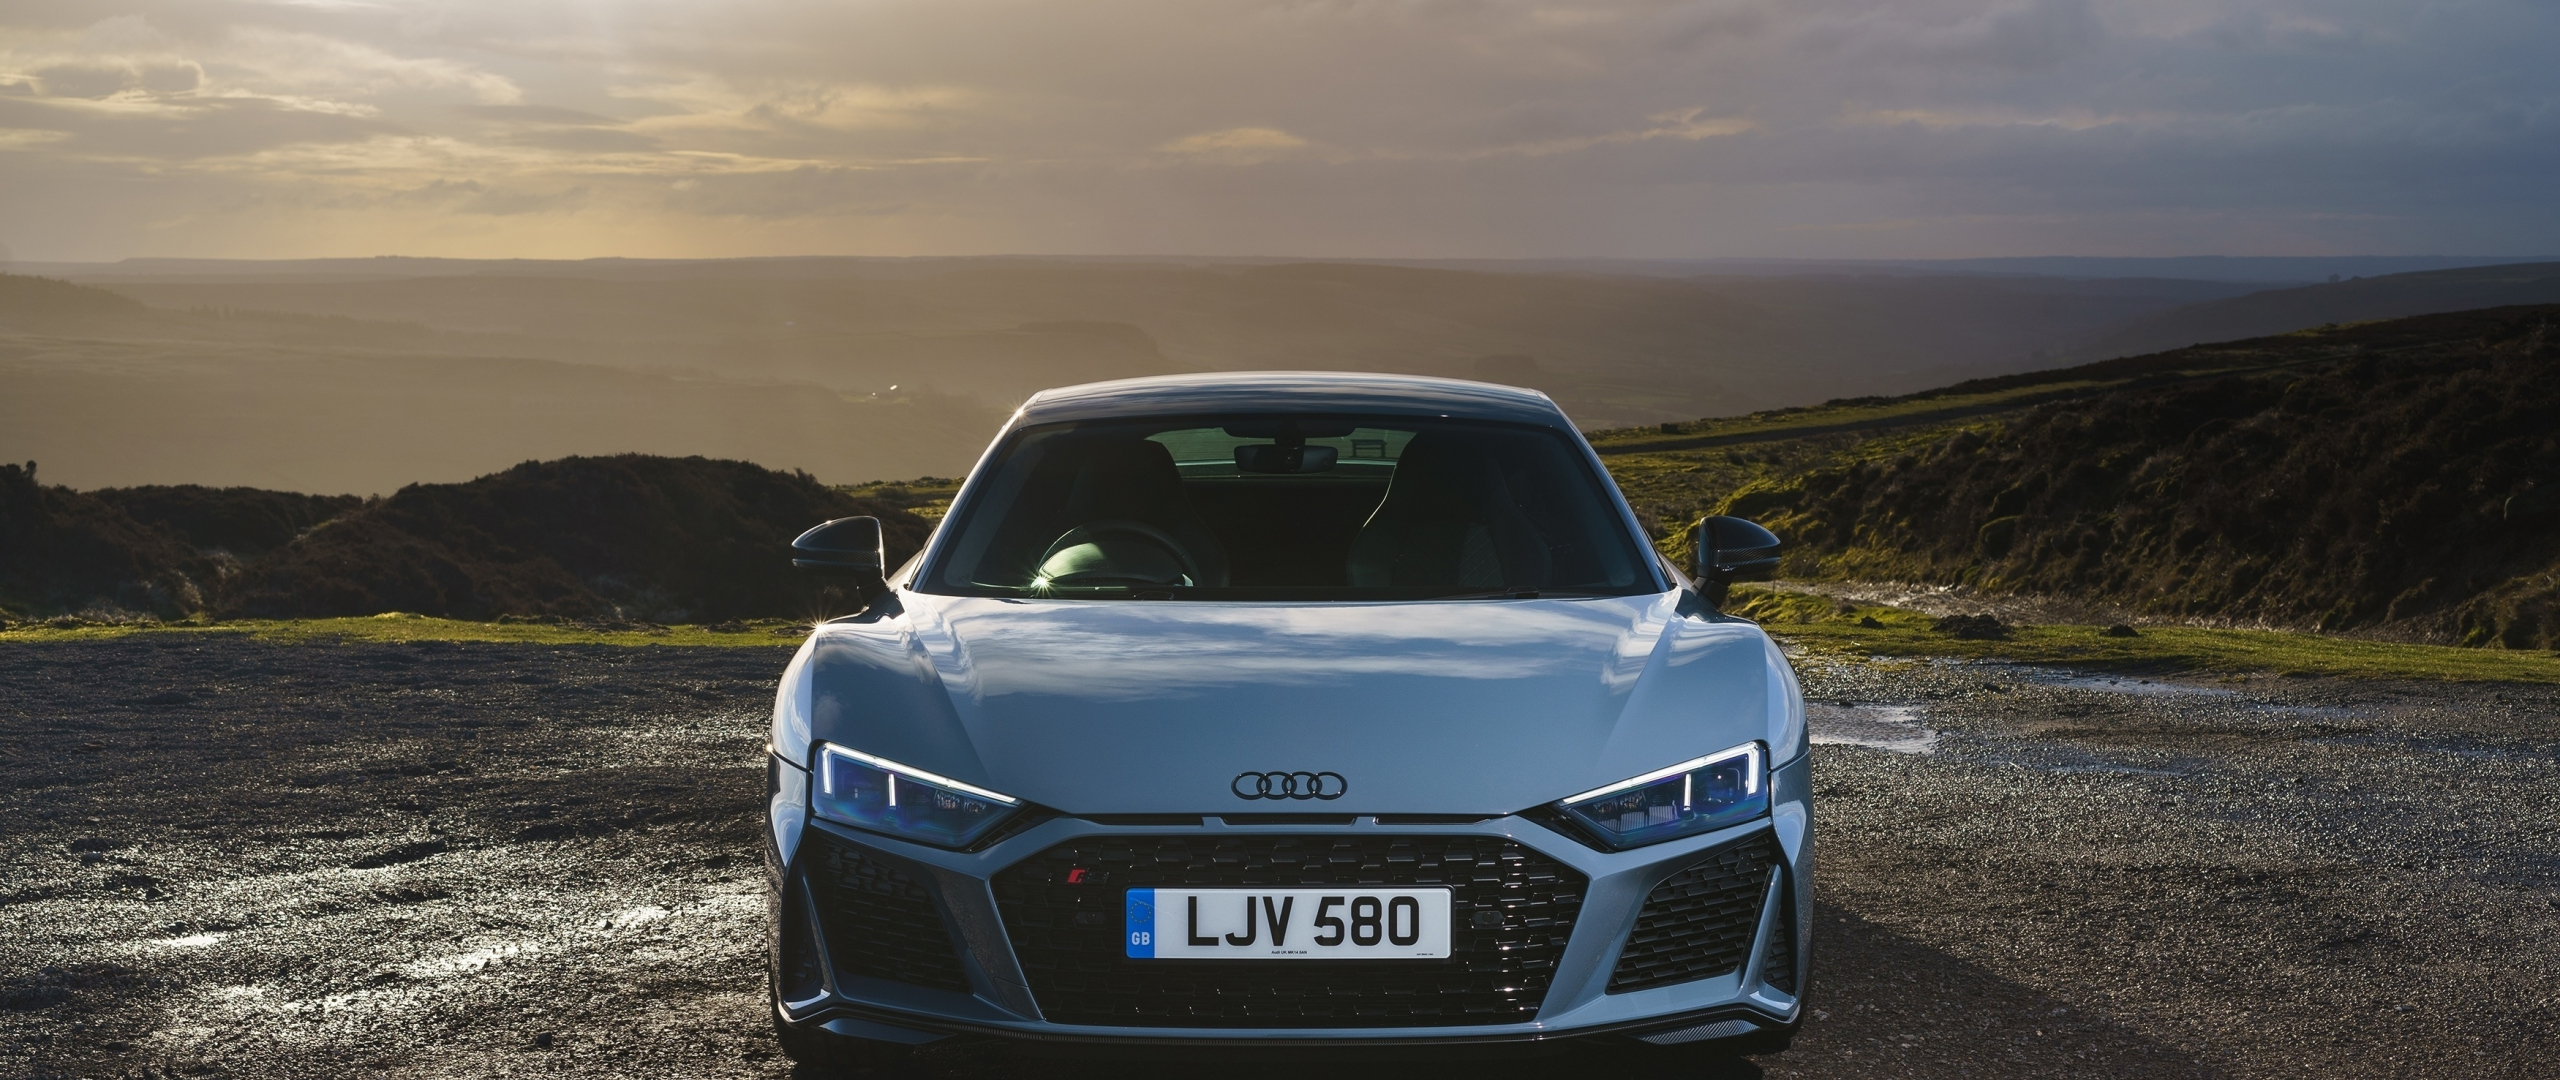 Download 2560x1080 Wallpaper Off Road Audi R8 V10 Luxury Car Dual Wide Widescreen 2560x1080 Hd Image Background 20627